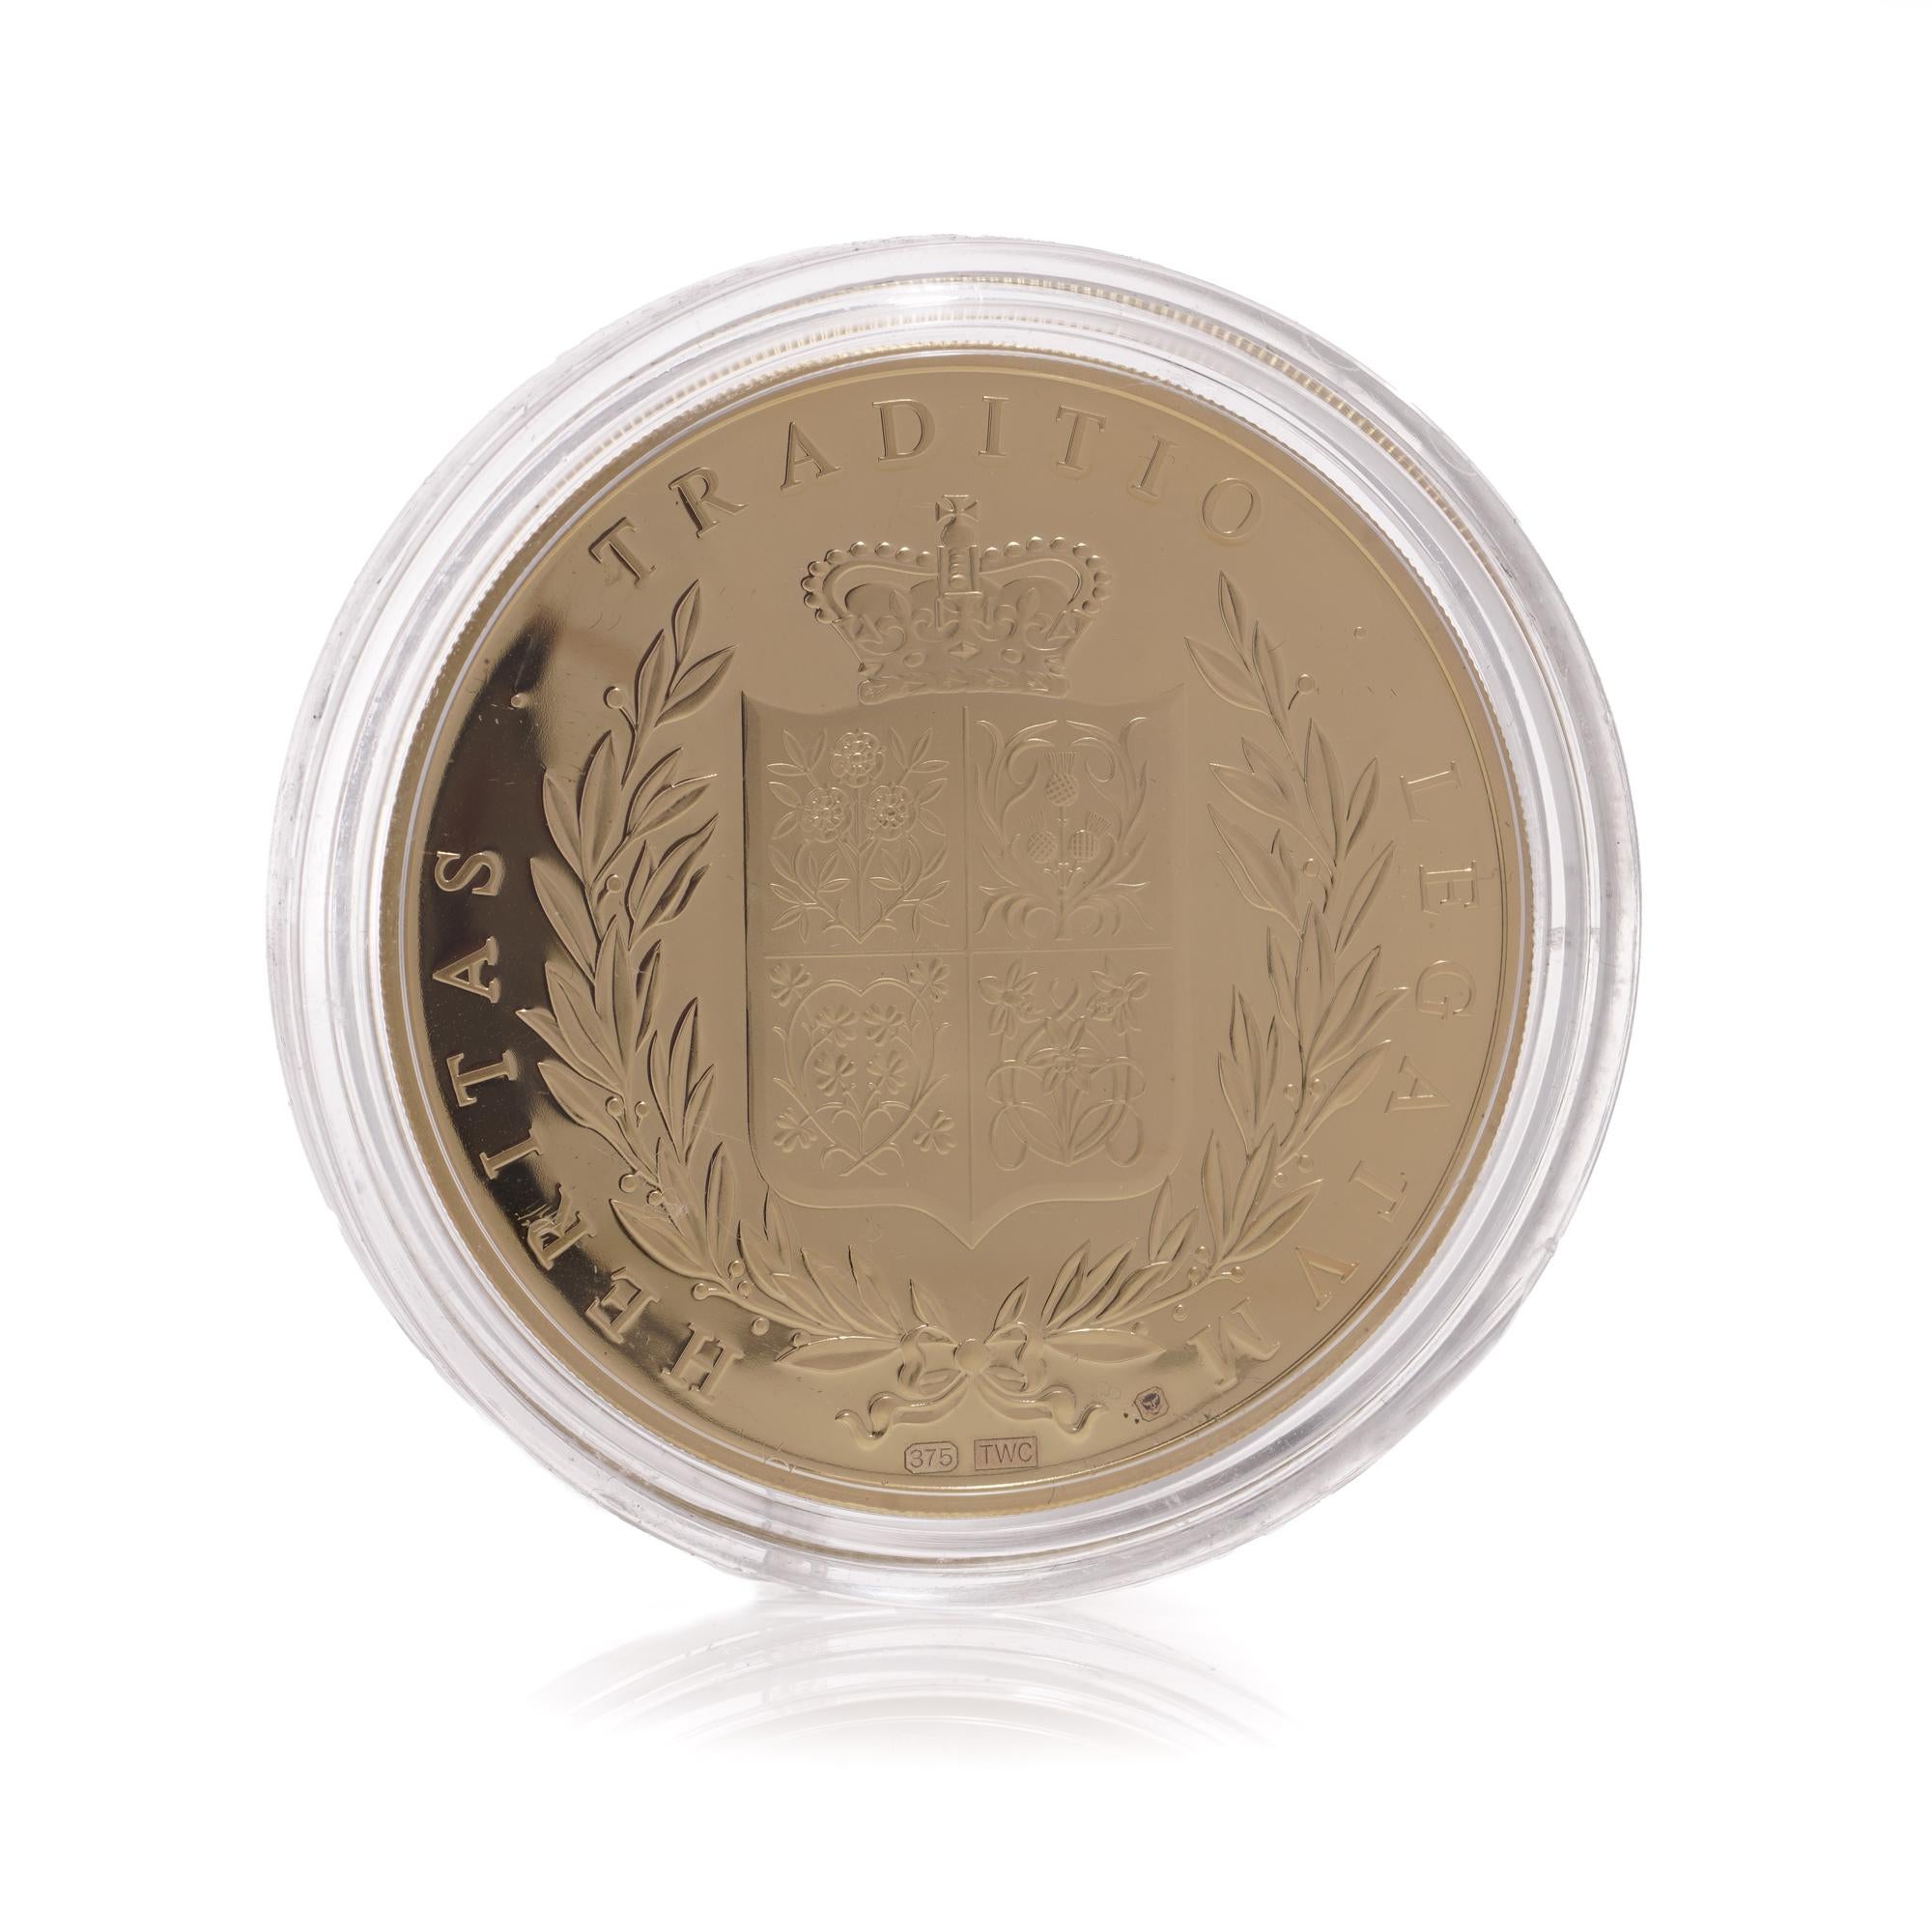 A 9ct gold proof coin, commemorating the First World War centenary For Sale 2